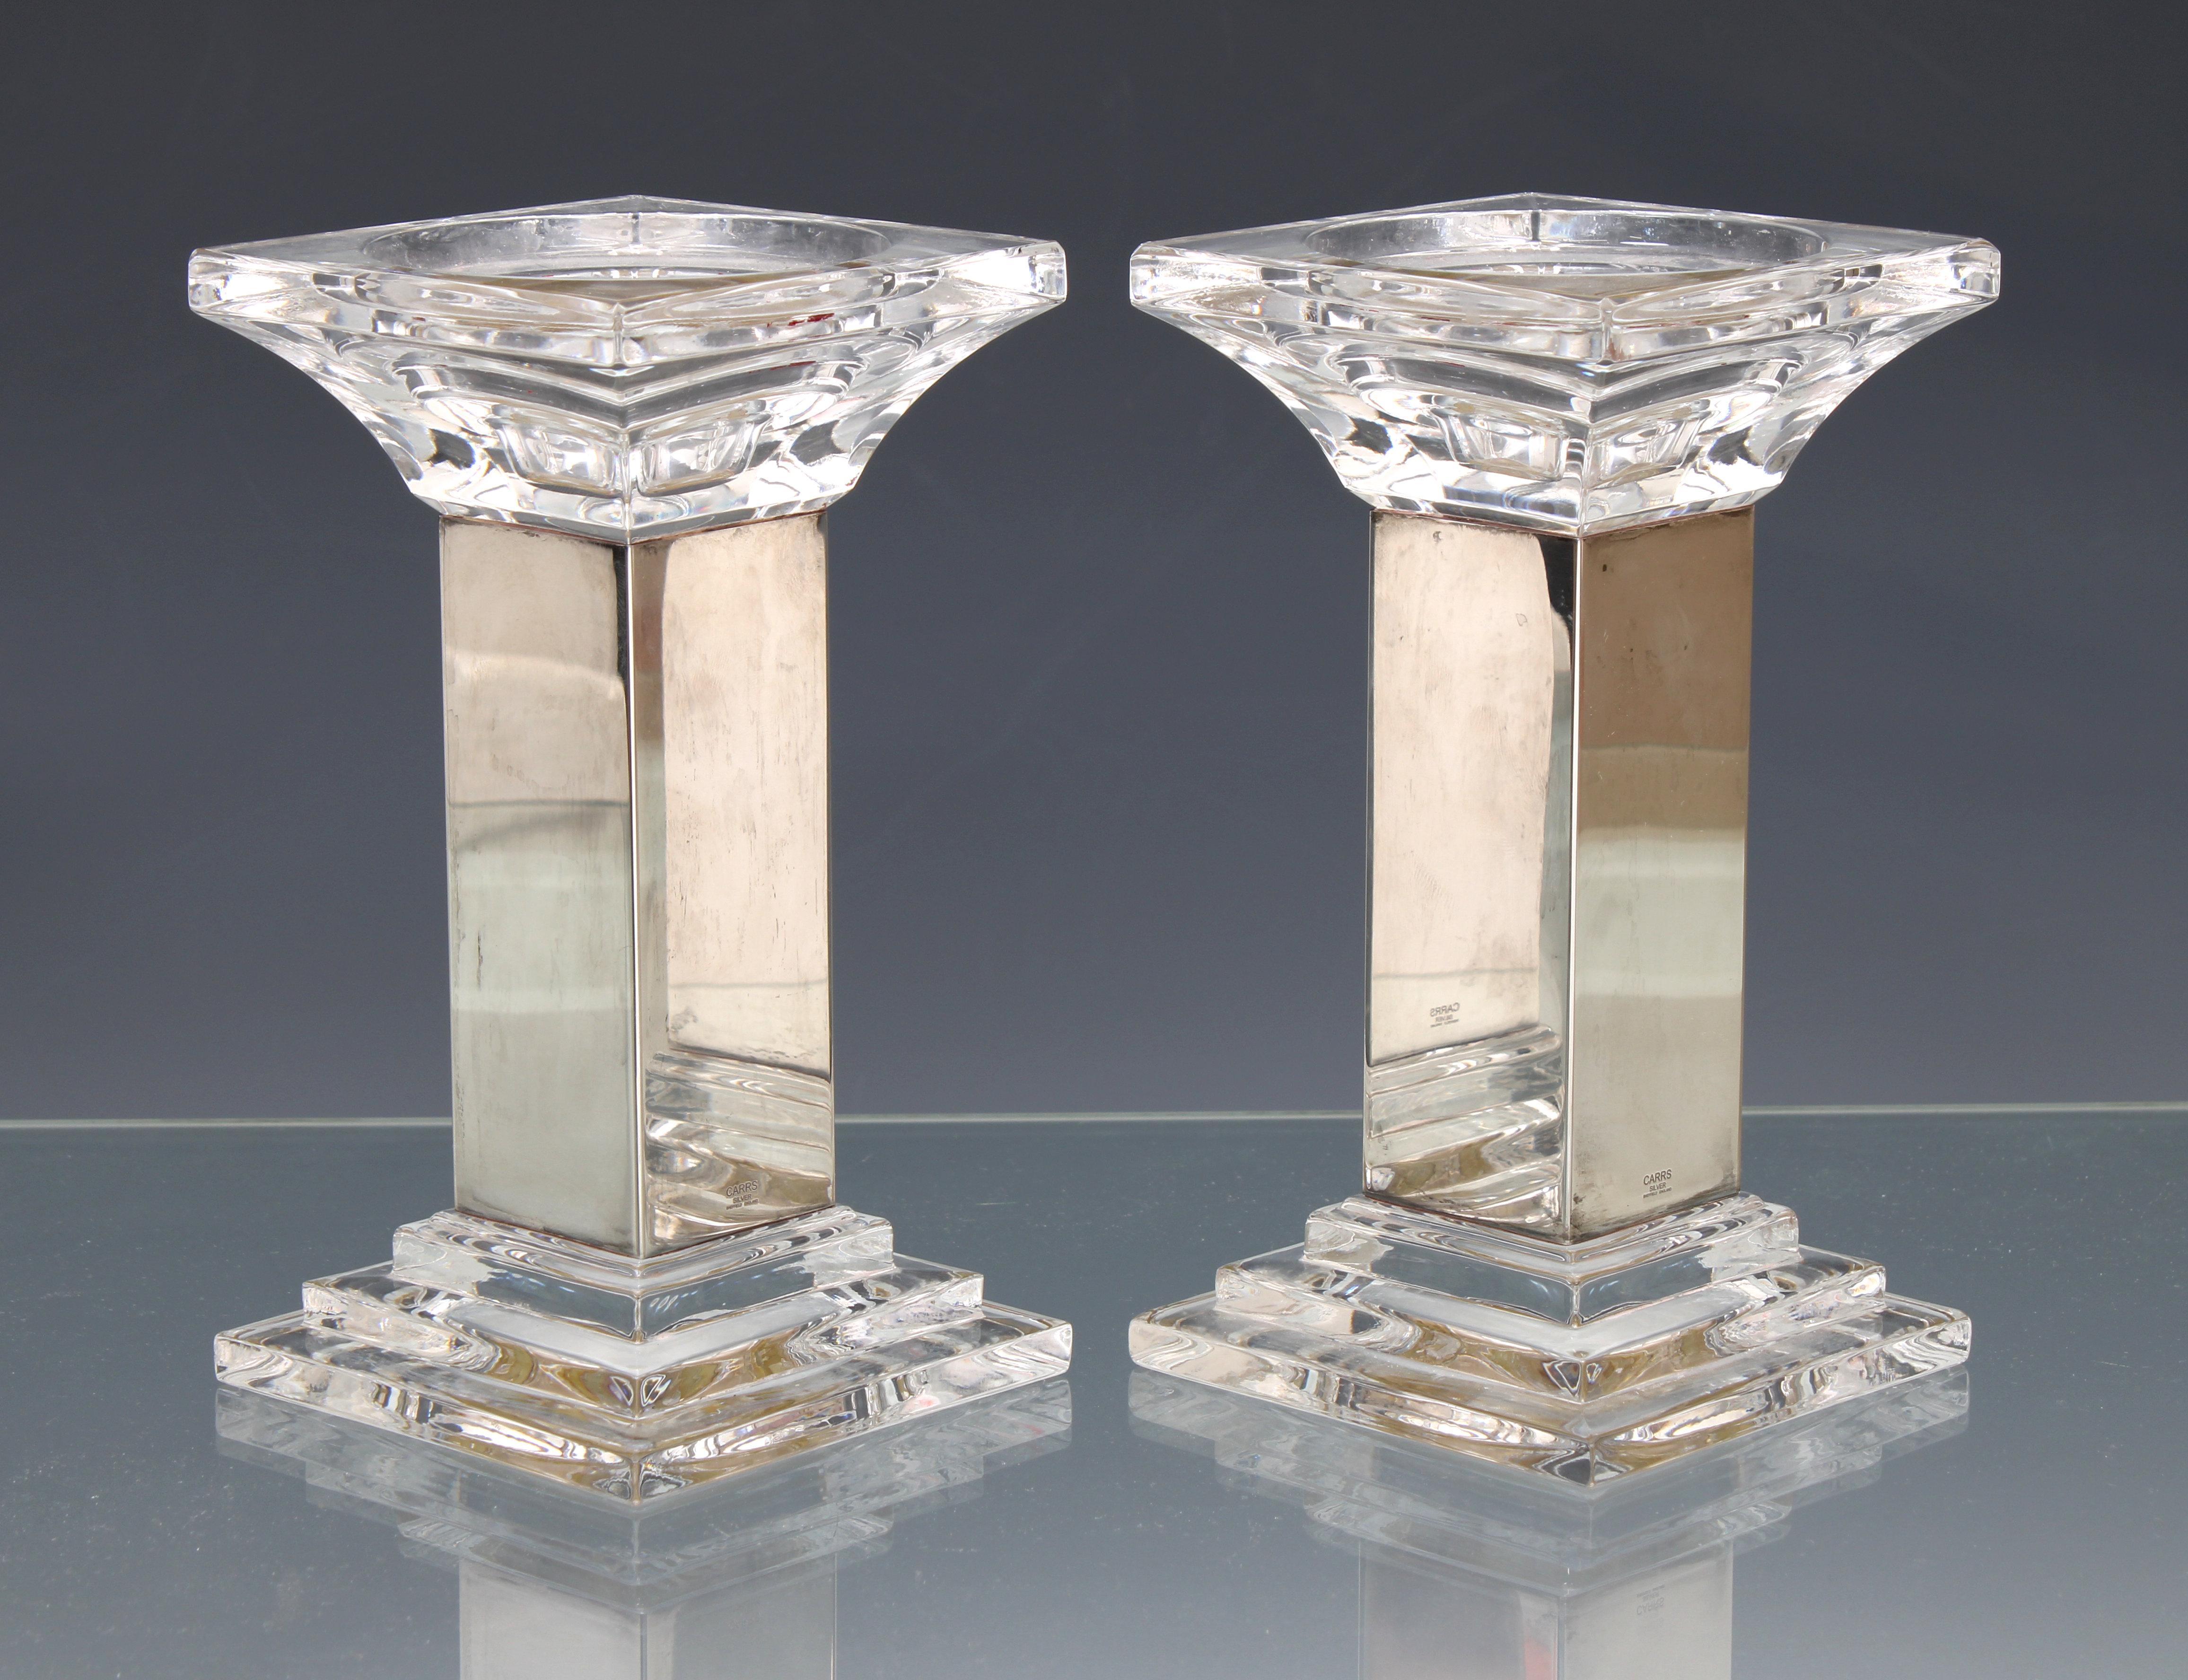 A pair of Elizabeth II Silver Mounted Glass Candlesticks - Image 2 of 3